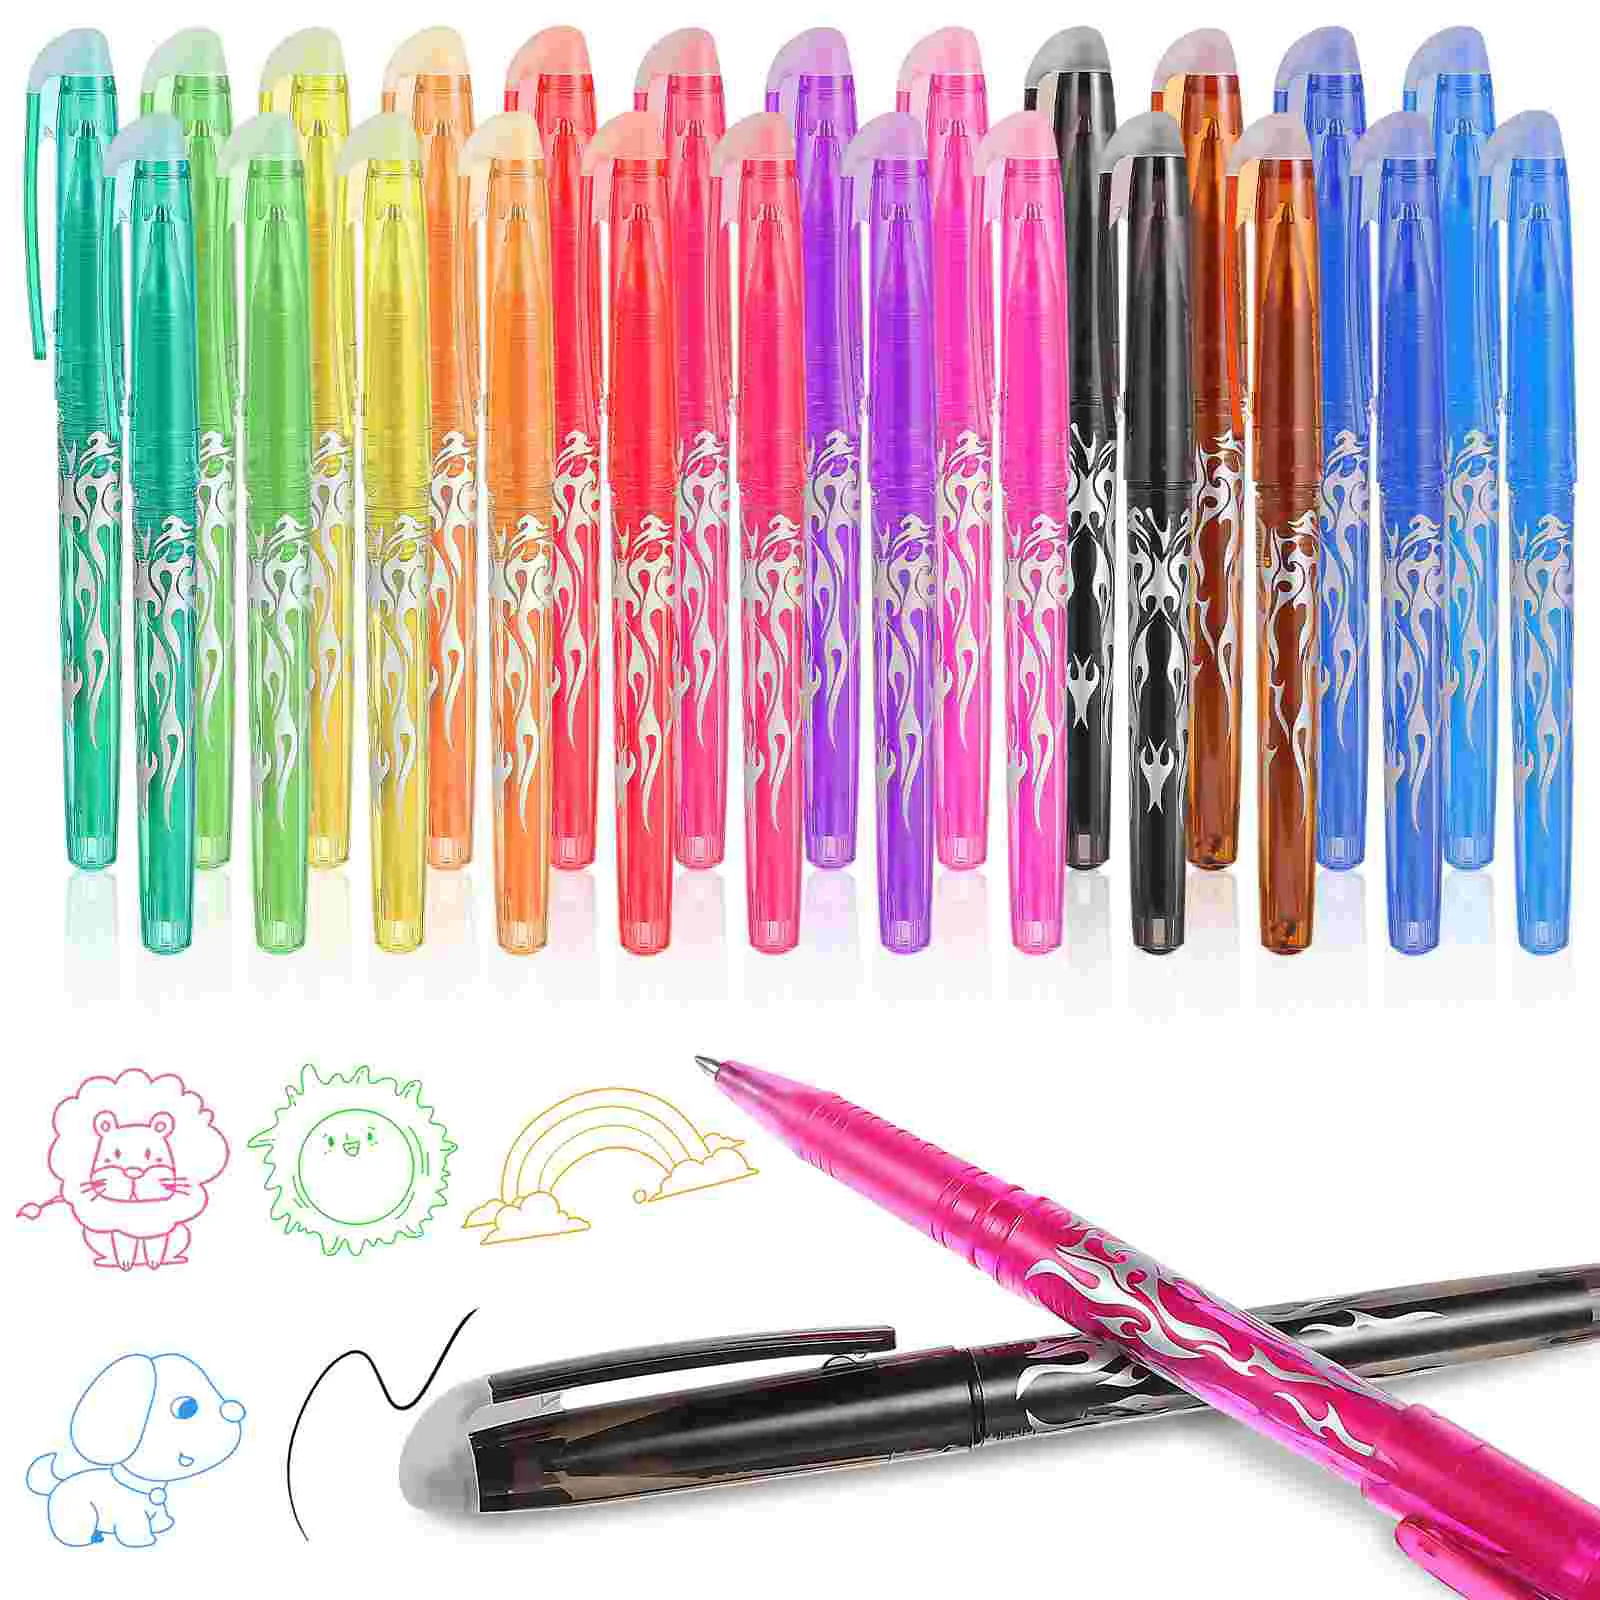 

24 Pcs Disappearing Pen Sign Pens Erasable Party Favors Colored Cartoon Signing Student Creative School Supplies